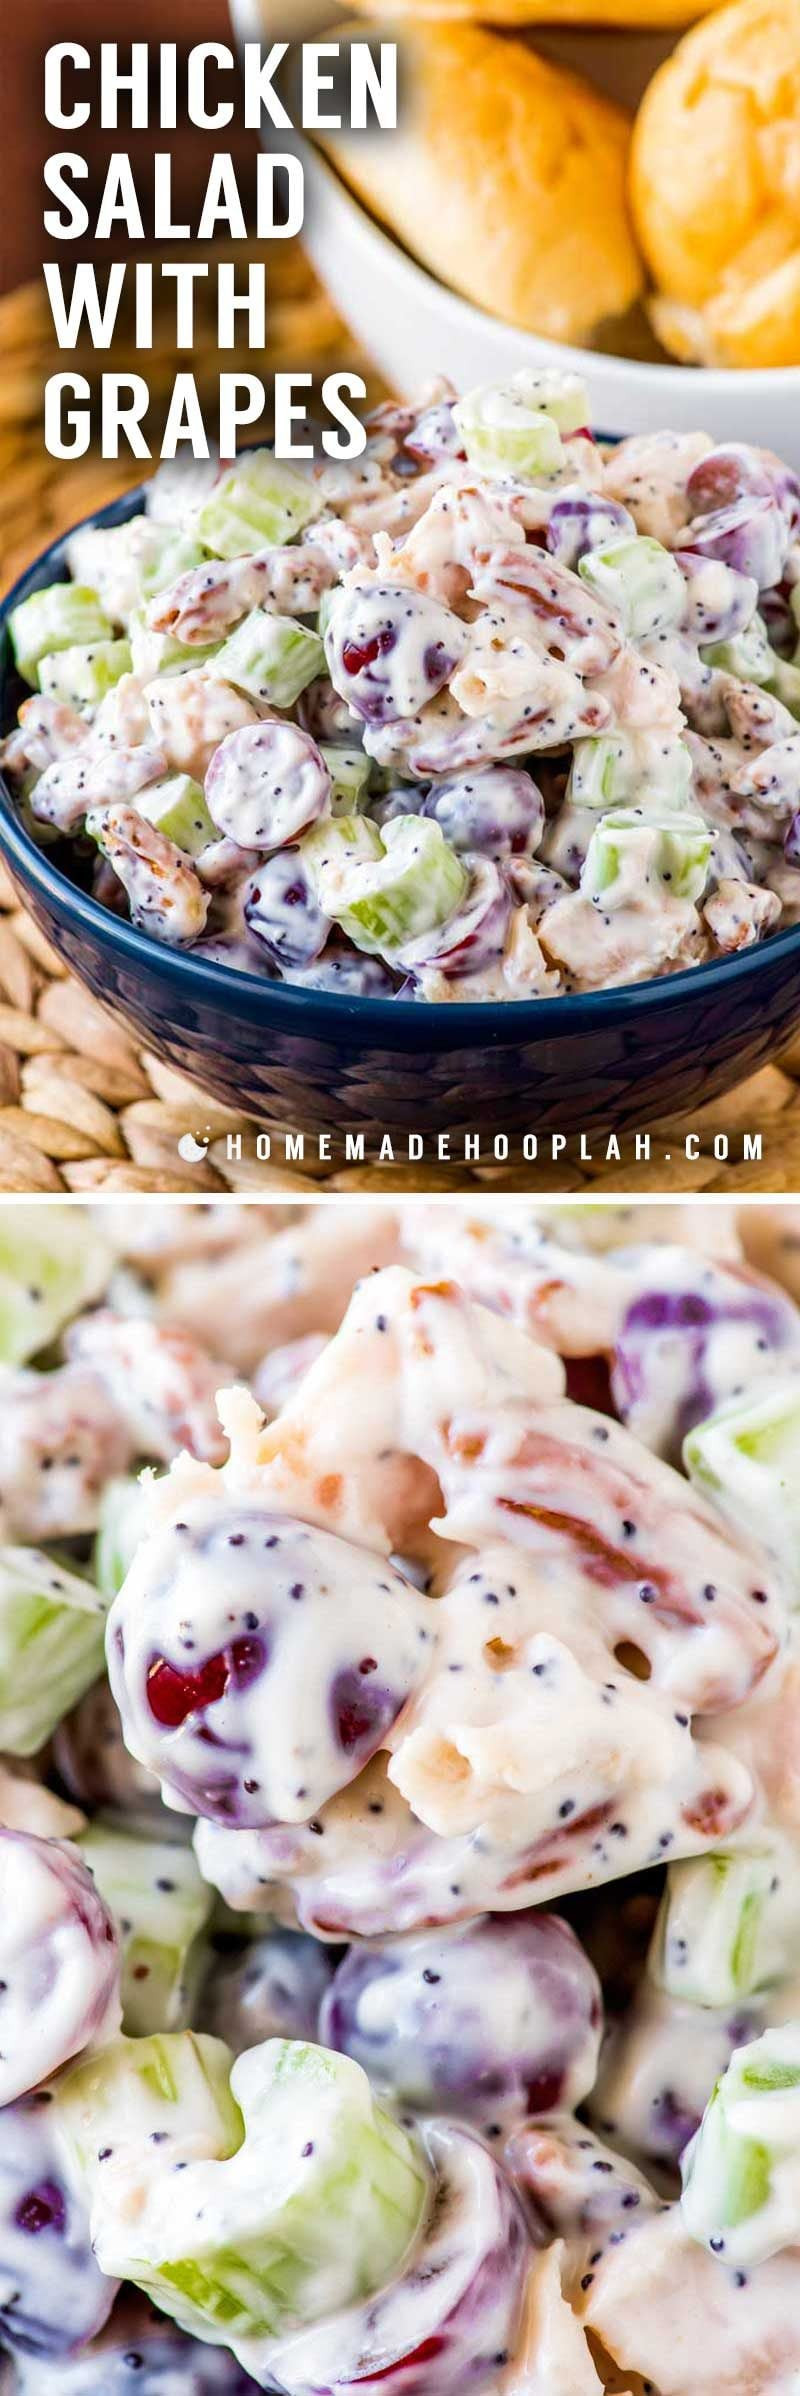 Chicken Salad With Grapes And Pecans
 Chicken Salad with Grapes Homemade Hooplah